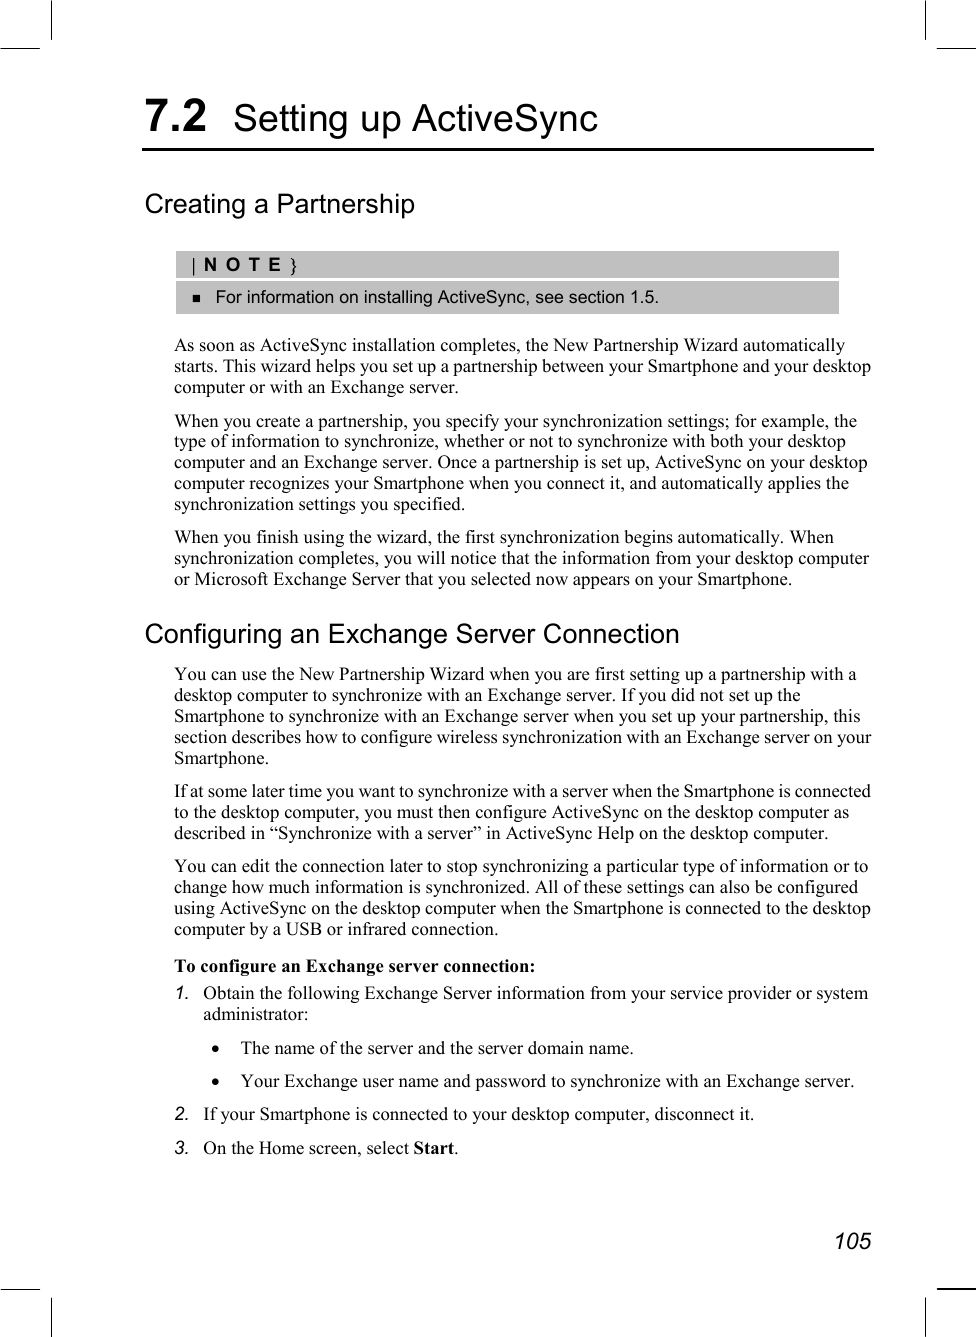   105 7.2  Setting up ActiveSync Creating a Partnership  |NOTE}   For information on installing ActiveSync, see section 1.5.  As soon as ActiveSync installation completes, the New Partnership Wizard automatically starts. This wizard helps you set up a partnership between your Smartphone and your desktop computer or with an Exchange server.  When you create a partnership, you specify your synchronization settings; for example, the type of information to synchronize, whether or not to synchronize with both your desktop computer and an Exchange server. Once a partnership is set up, ActiveSync on your desktop computer recognizes your Smartphone when you connect it, and automatically applies the synchronization settings you specified. When you finish using the wizard, the first synchronization begins automatically. When synchronization completes, you will notice that the information from your desktop computer or Microsoft Exchange Server that you selected now appears on your Smartphone. Configuring an Exchange Server Connection You can use the New Partnership Wizard when you are first setting up a partnership with a desktop computer to synchronize with an Exchange server. If you did not set up the Smartphone to synchronize with an Exchange server when you set up your partnership, this section describes how to configure wireless synchronization with an Exchange server on your Smartphone. If at some later time you want to synchronize with a server when the Smartphone is connected to the desktop computer, you must then configure ActiveSync on the desktop computer as described in “Synchronize with a server” in ActiveSync Help on the desktop computer. You can edit the connection later to stop synchronizing a particular type of information or to change how much information is synchronized. All of these settings can also be configured using ActiveSync on the desktop computer when the Smartphone is connected to the desktop computer by a USB or infrared connection. To configure an Exchange server connection: 1.  Obtain the following Exchange Server information from your service provider or system administrator: •  The name of the server and the server domain name. •  Your Exchange user name and password to synchronize with an Exchange server. 2.  If your Smartphone is connected to your desktop computer, disconnect it. 3.  On the Home screen, select Start. 